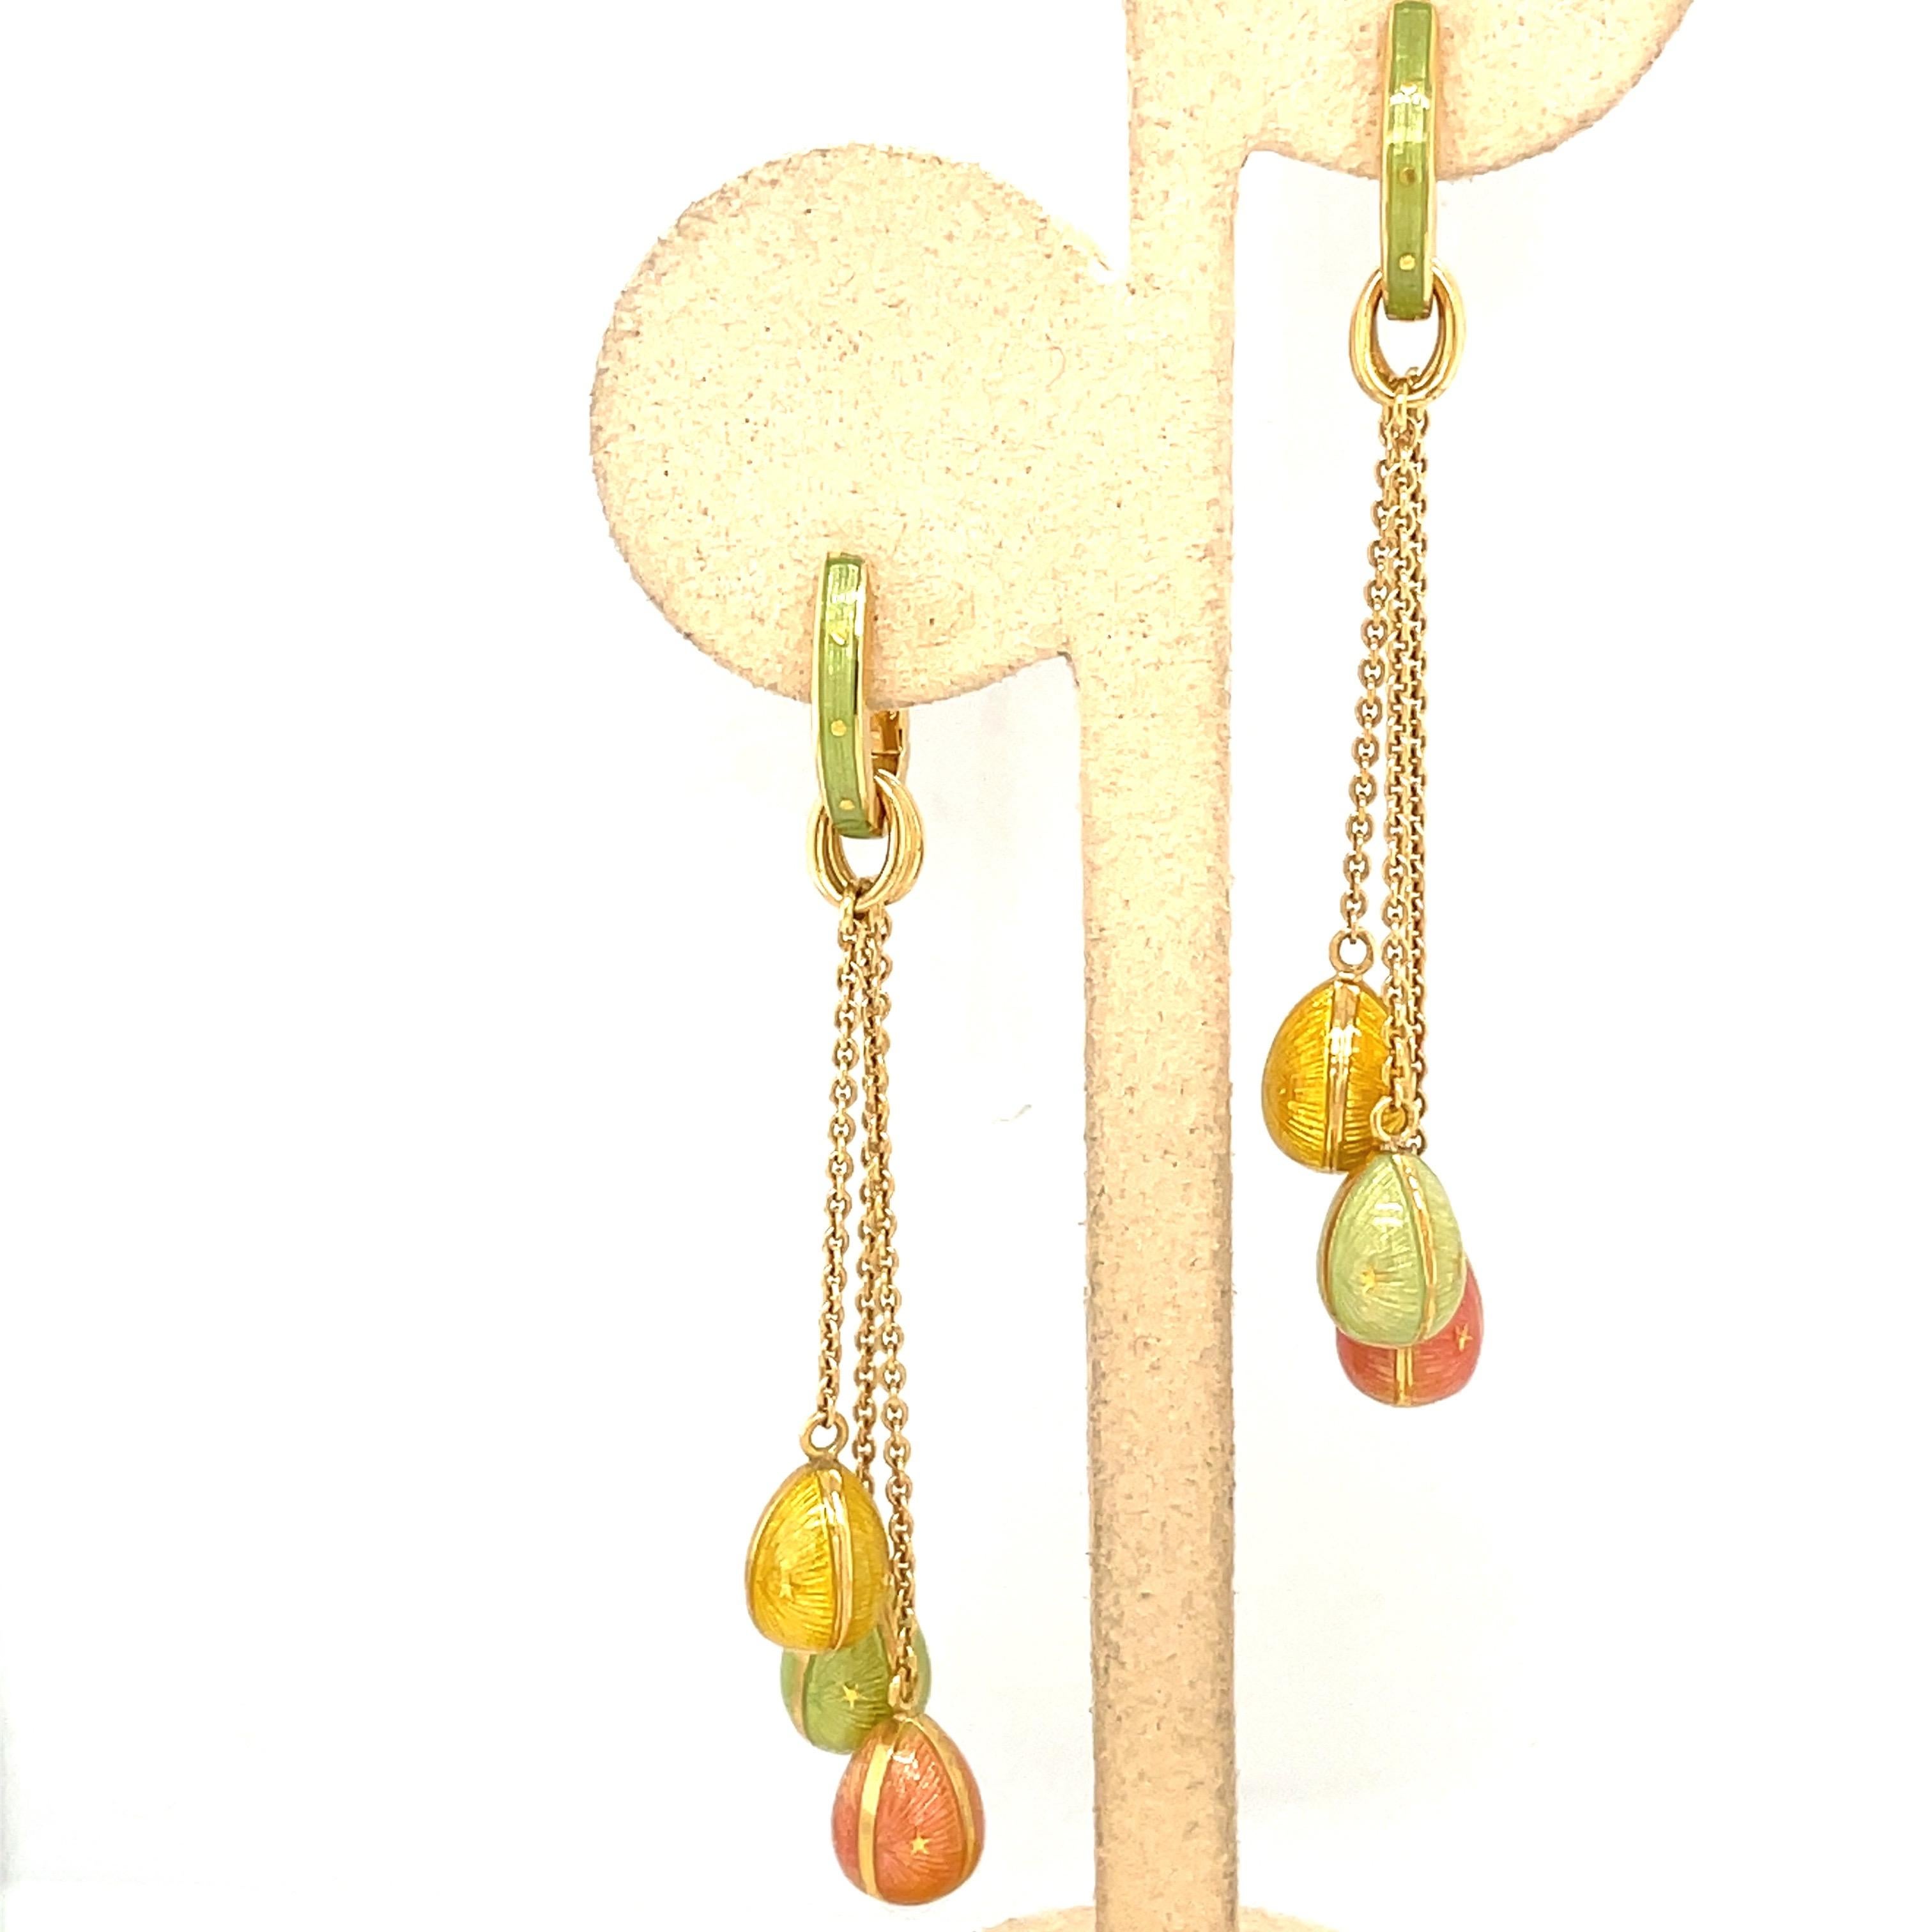 These modern 18 karat yellow gold Faberge earrings were crafted by Victor Mayer. Each earring features 3 hanging eggs in peach, yellow and mint  green guilloche enamel. The enamel eggs are hanging from an 18 karat yellow gold and mint enamel huggy